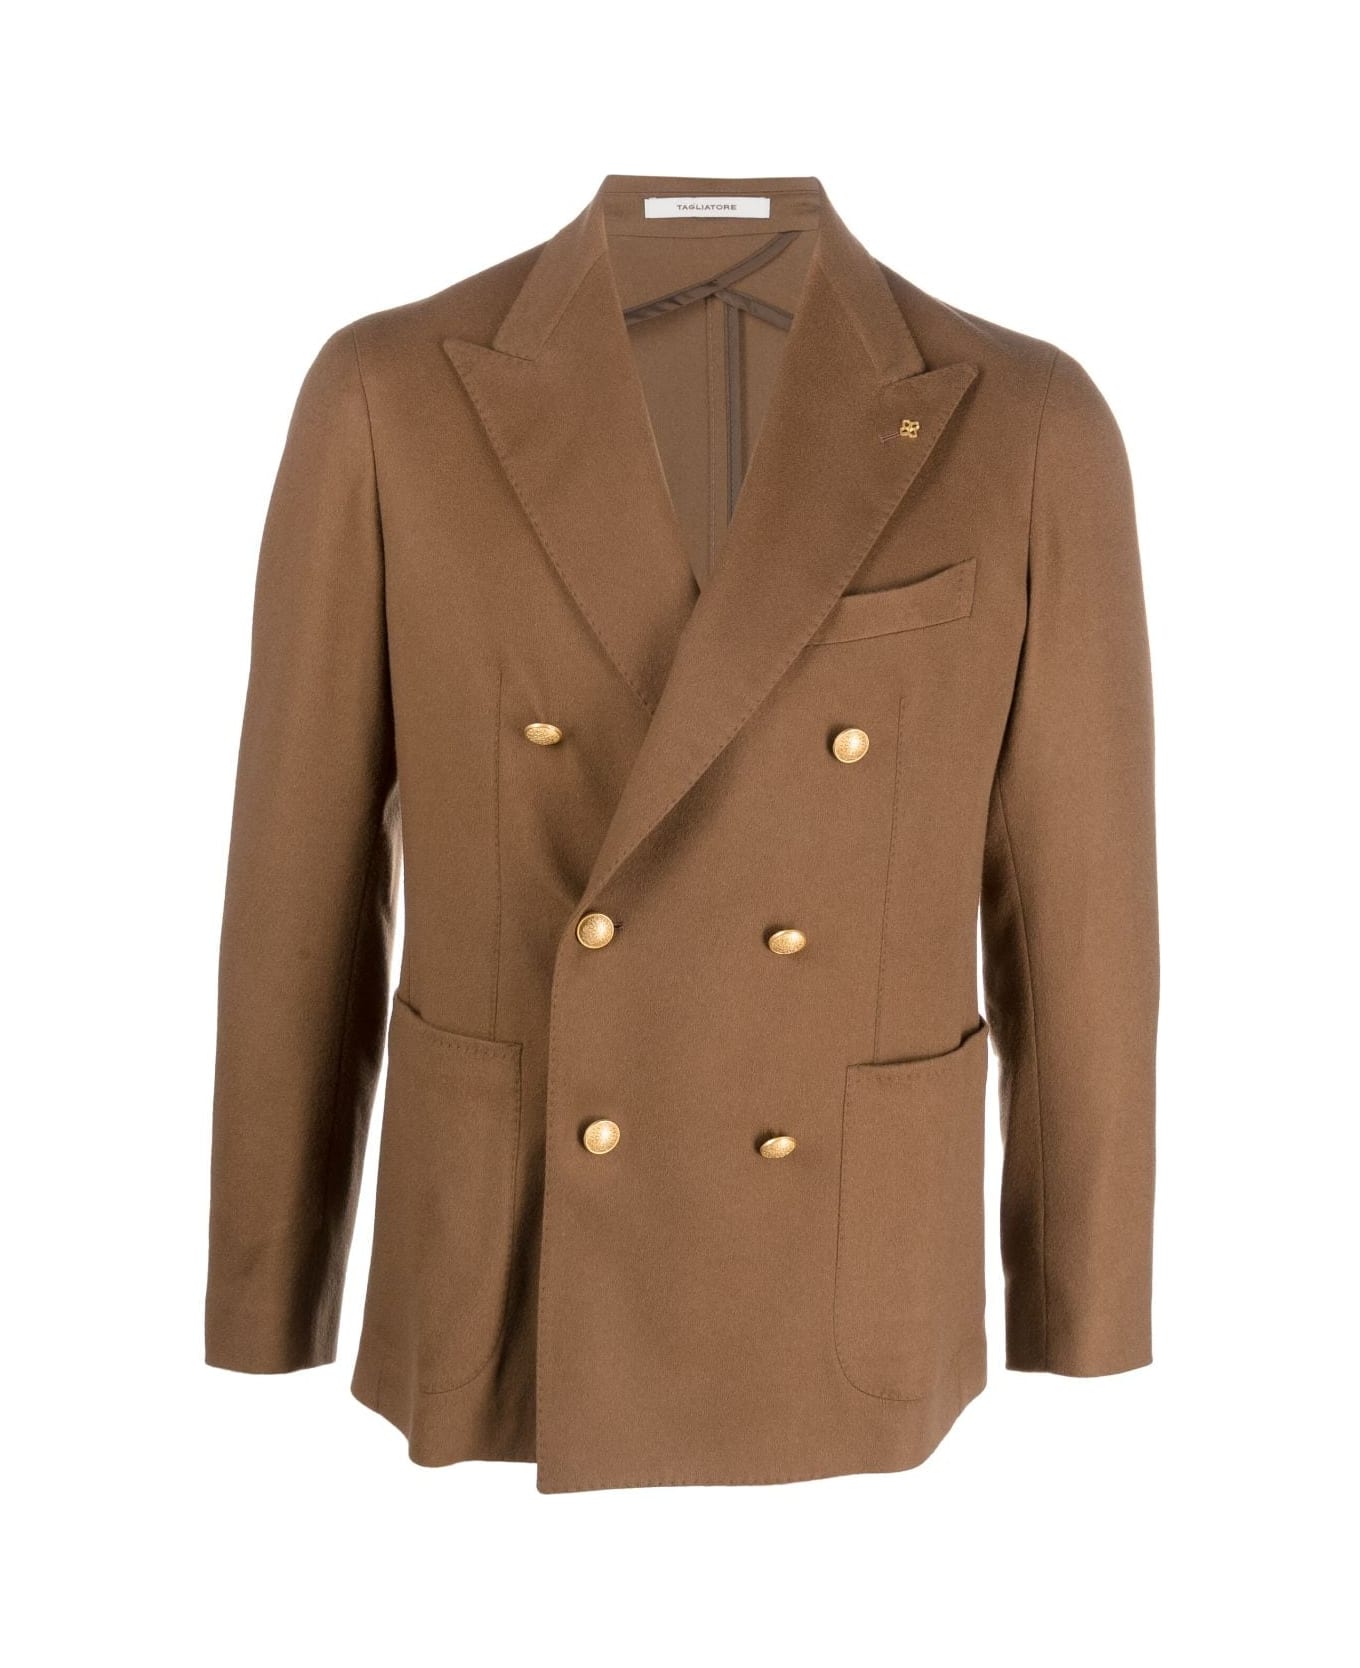 Tagliatore Double Breasted Jacket - Burnt